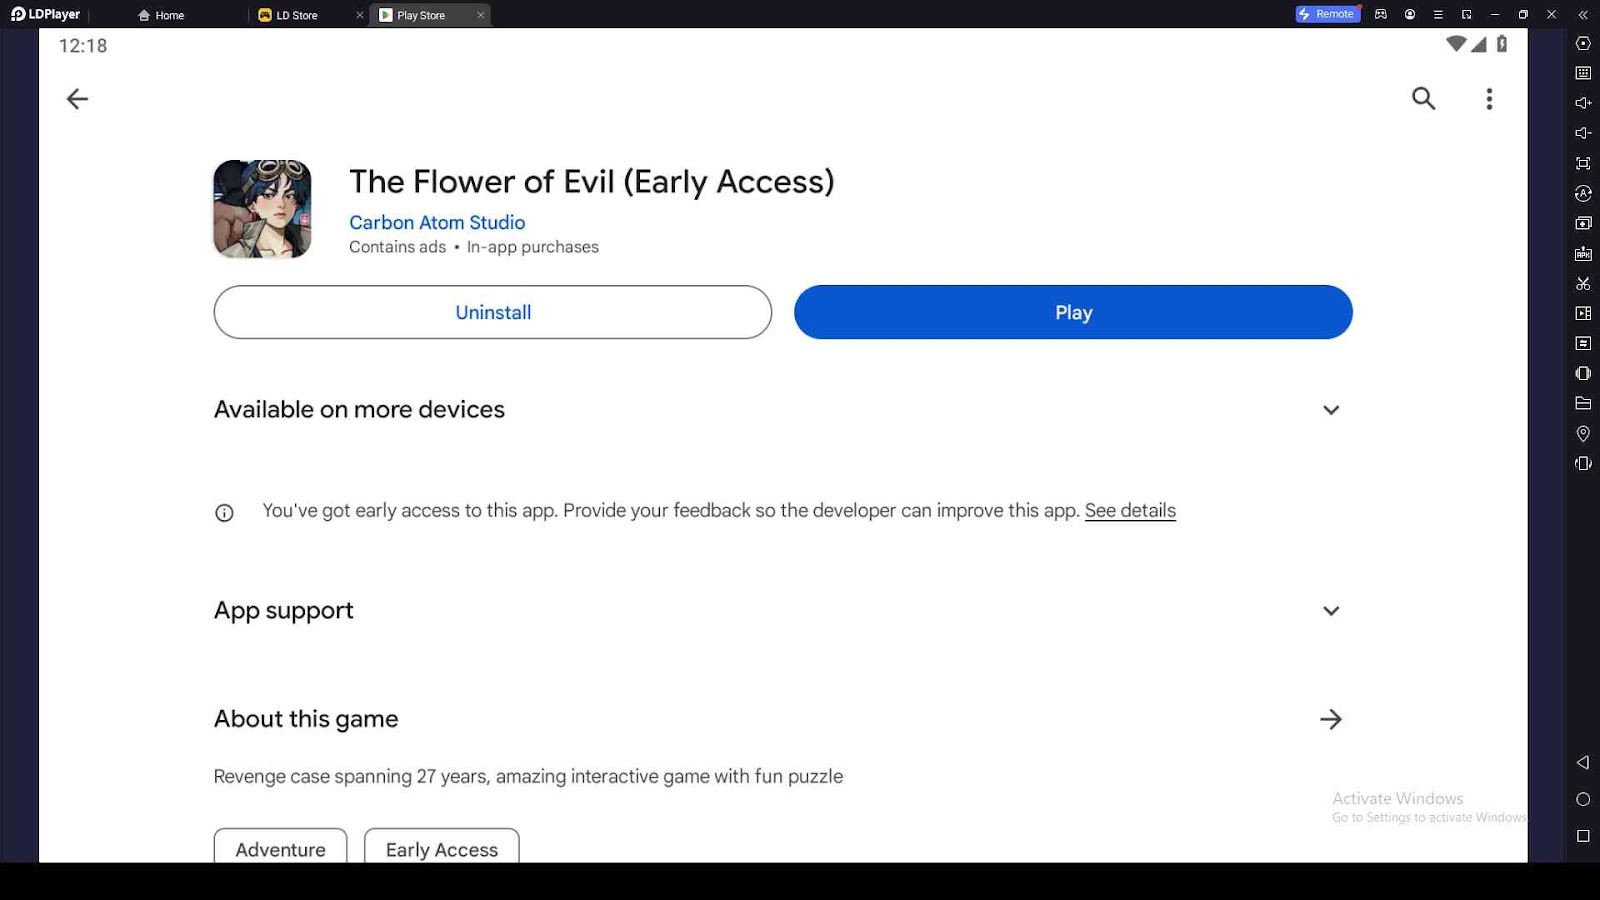 Playing The Flower of Evil on LDPlayer